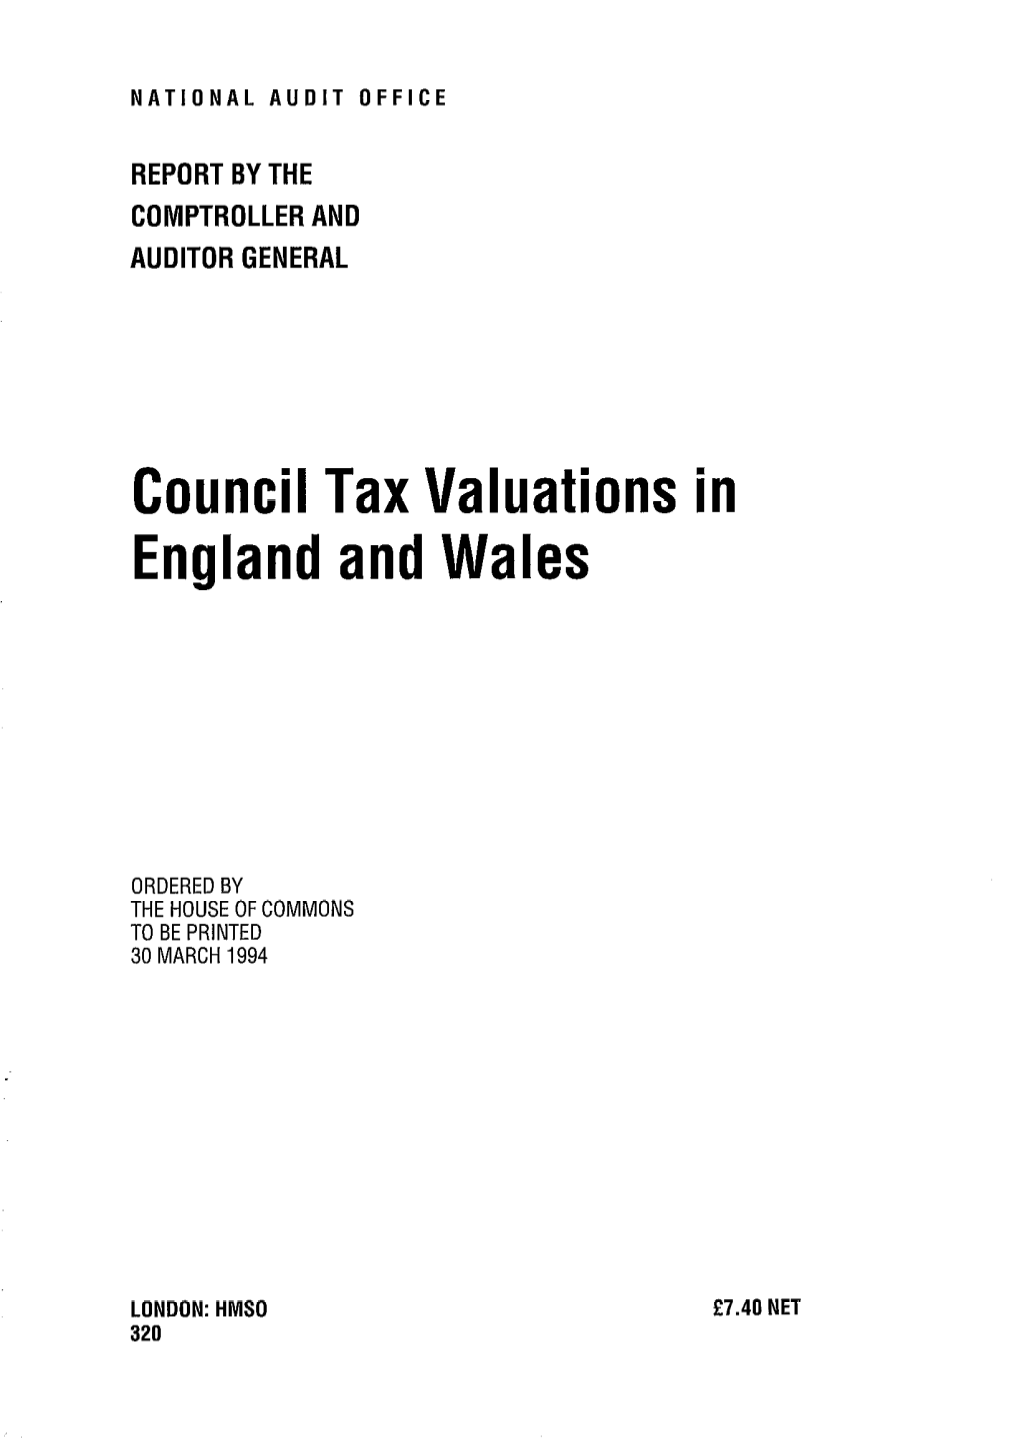 Council Tax Valuations in England and Wales